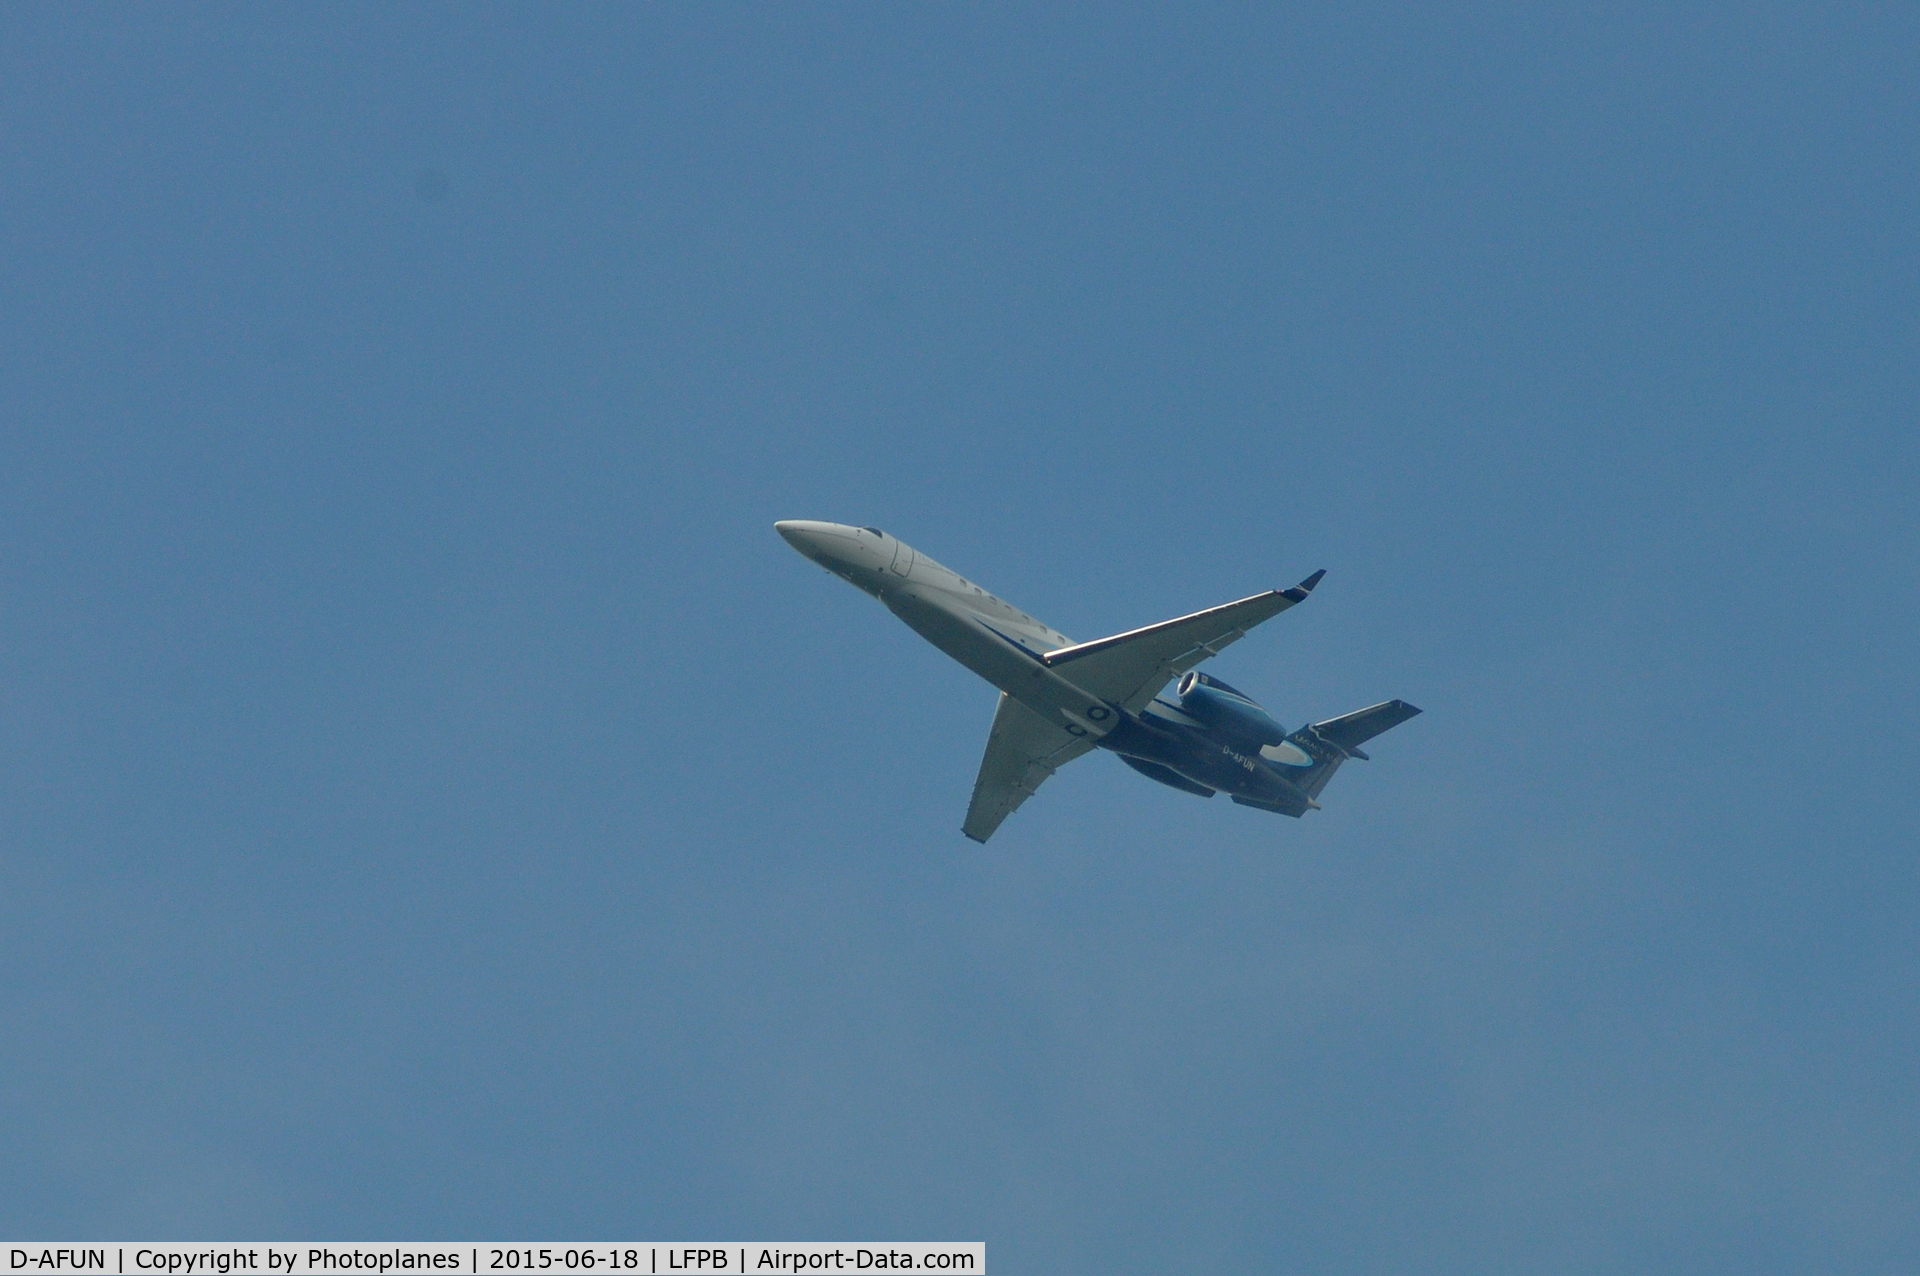 D-AFUN, 2013 Embraer EMB-135BJ Legacy 650 C/N 14501168, Le bourget approach